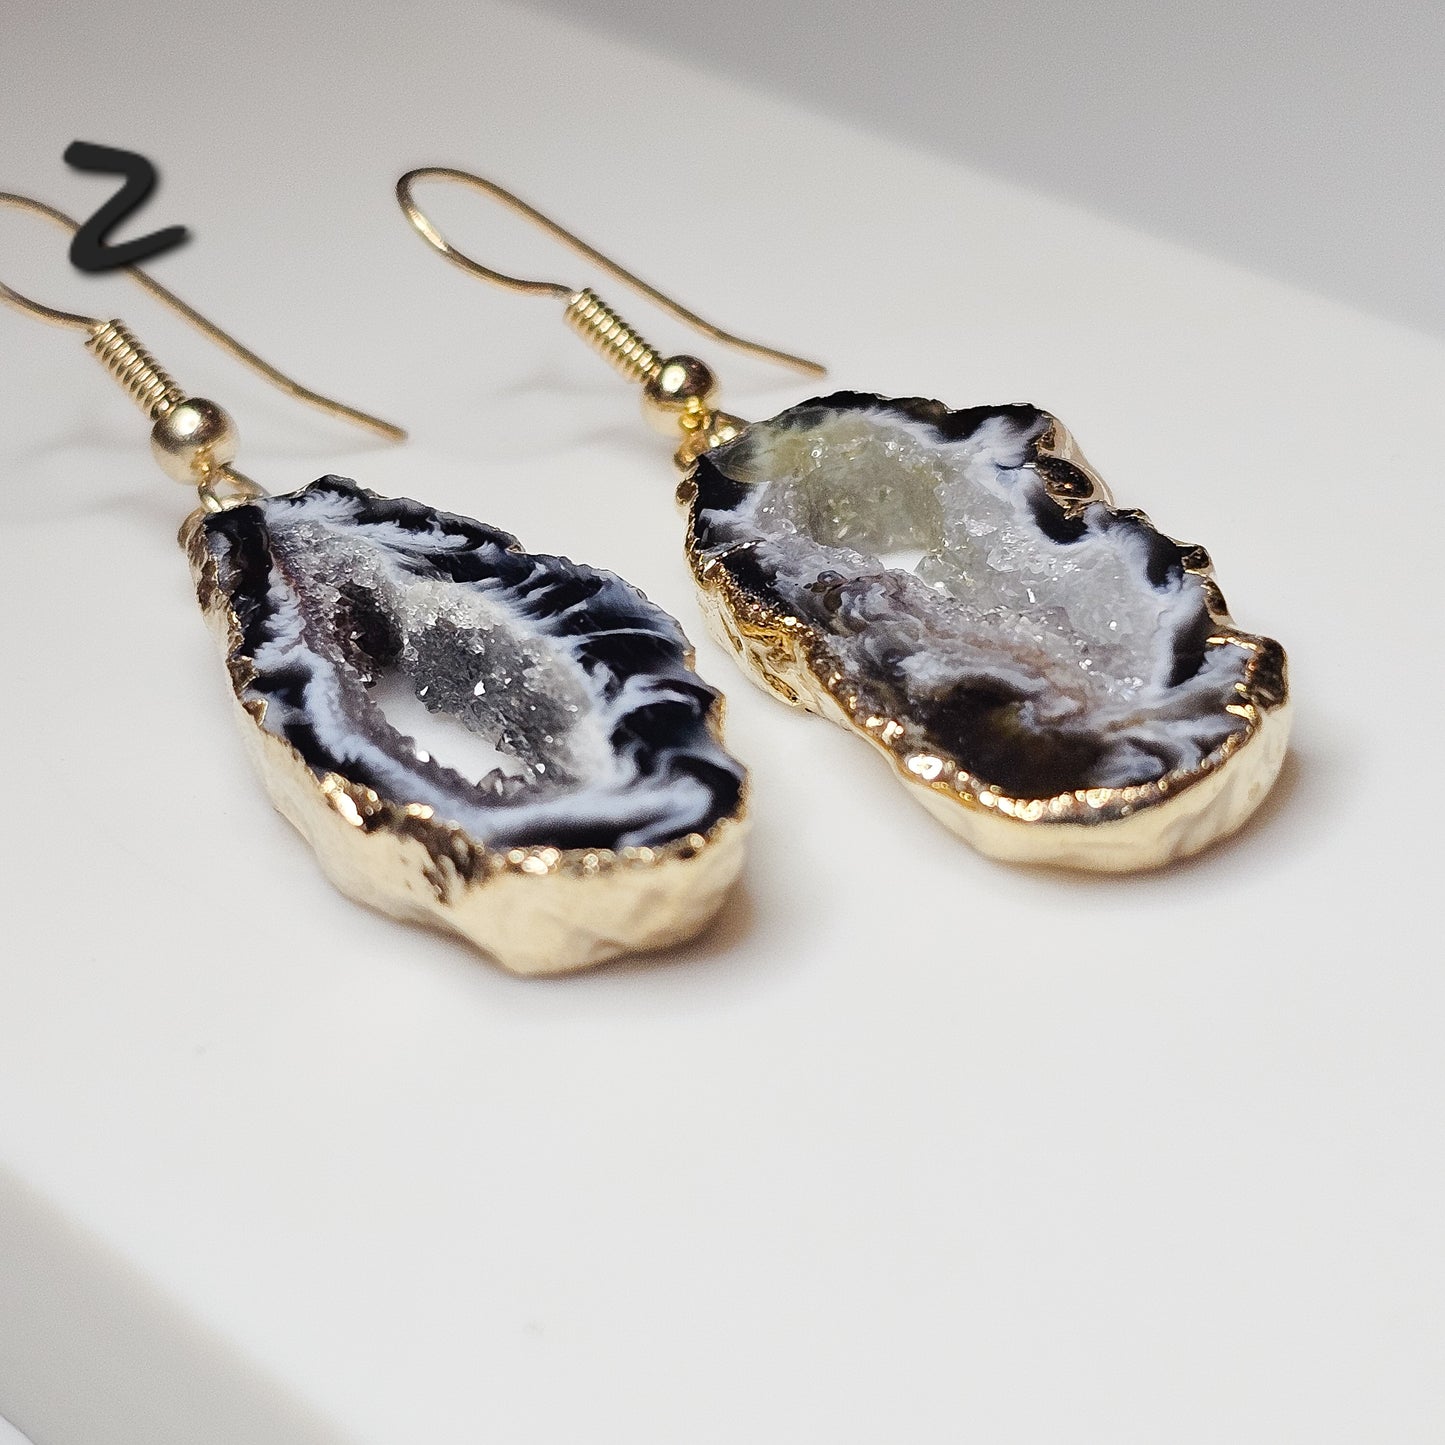 Druzy Agate slice 18k gold plated earrings with hypo-allergenic ear wires.